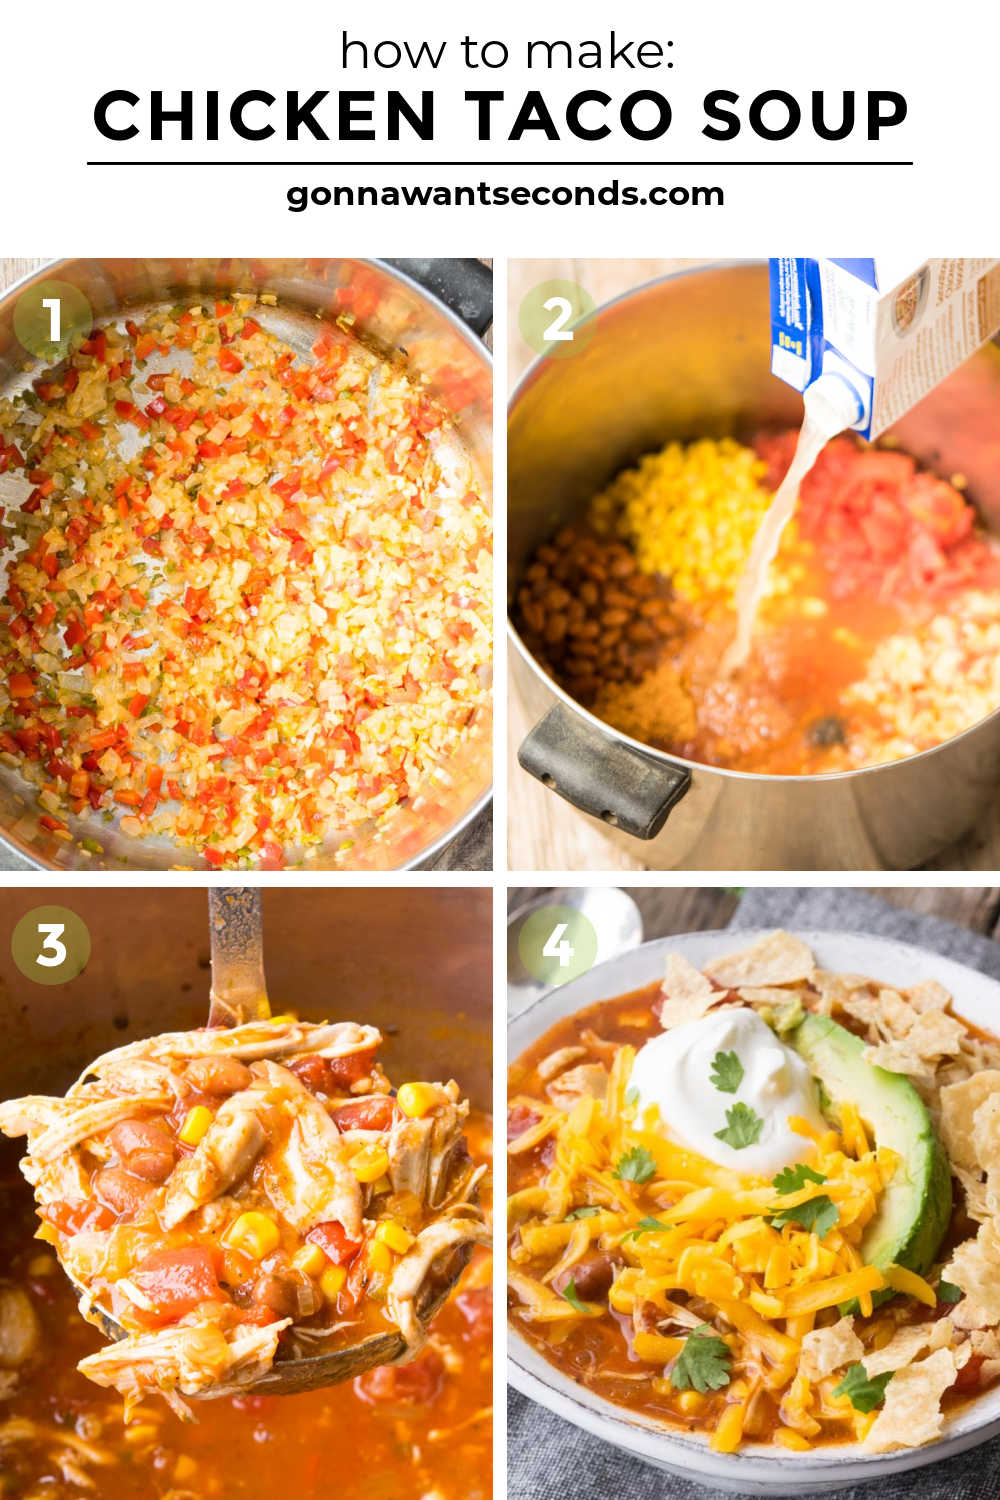 Step by step how to make chicken taco soup